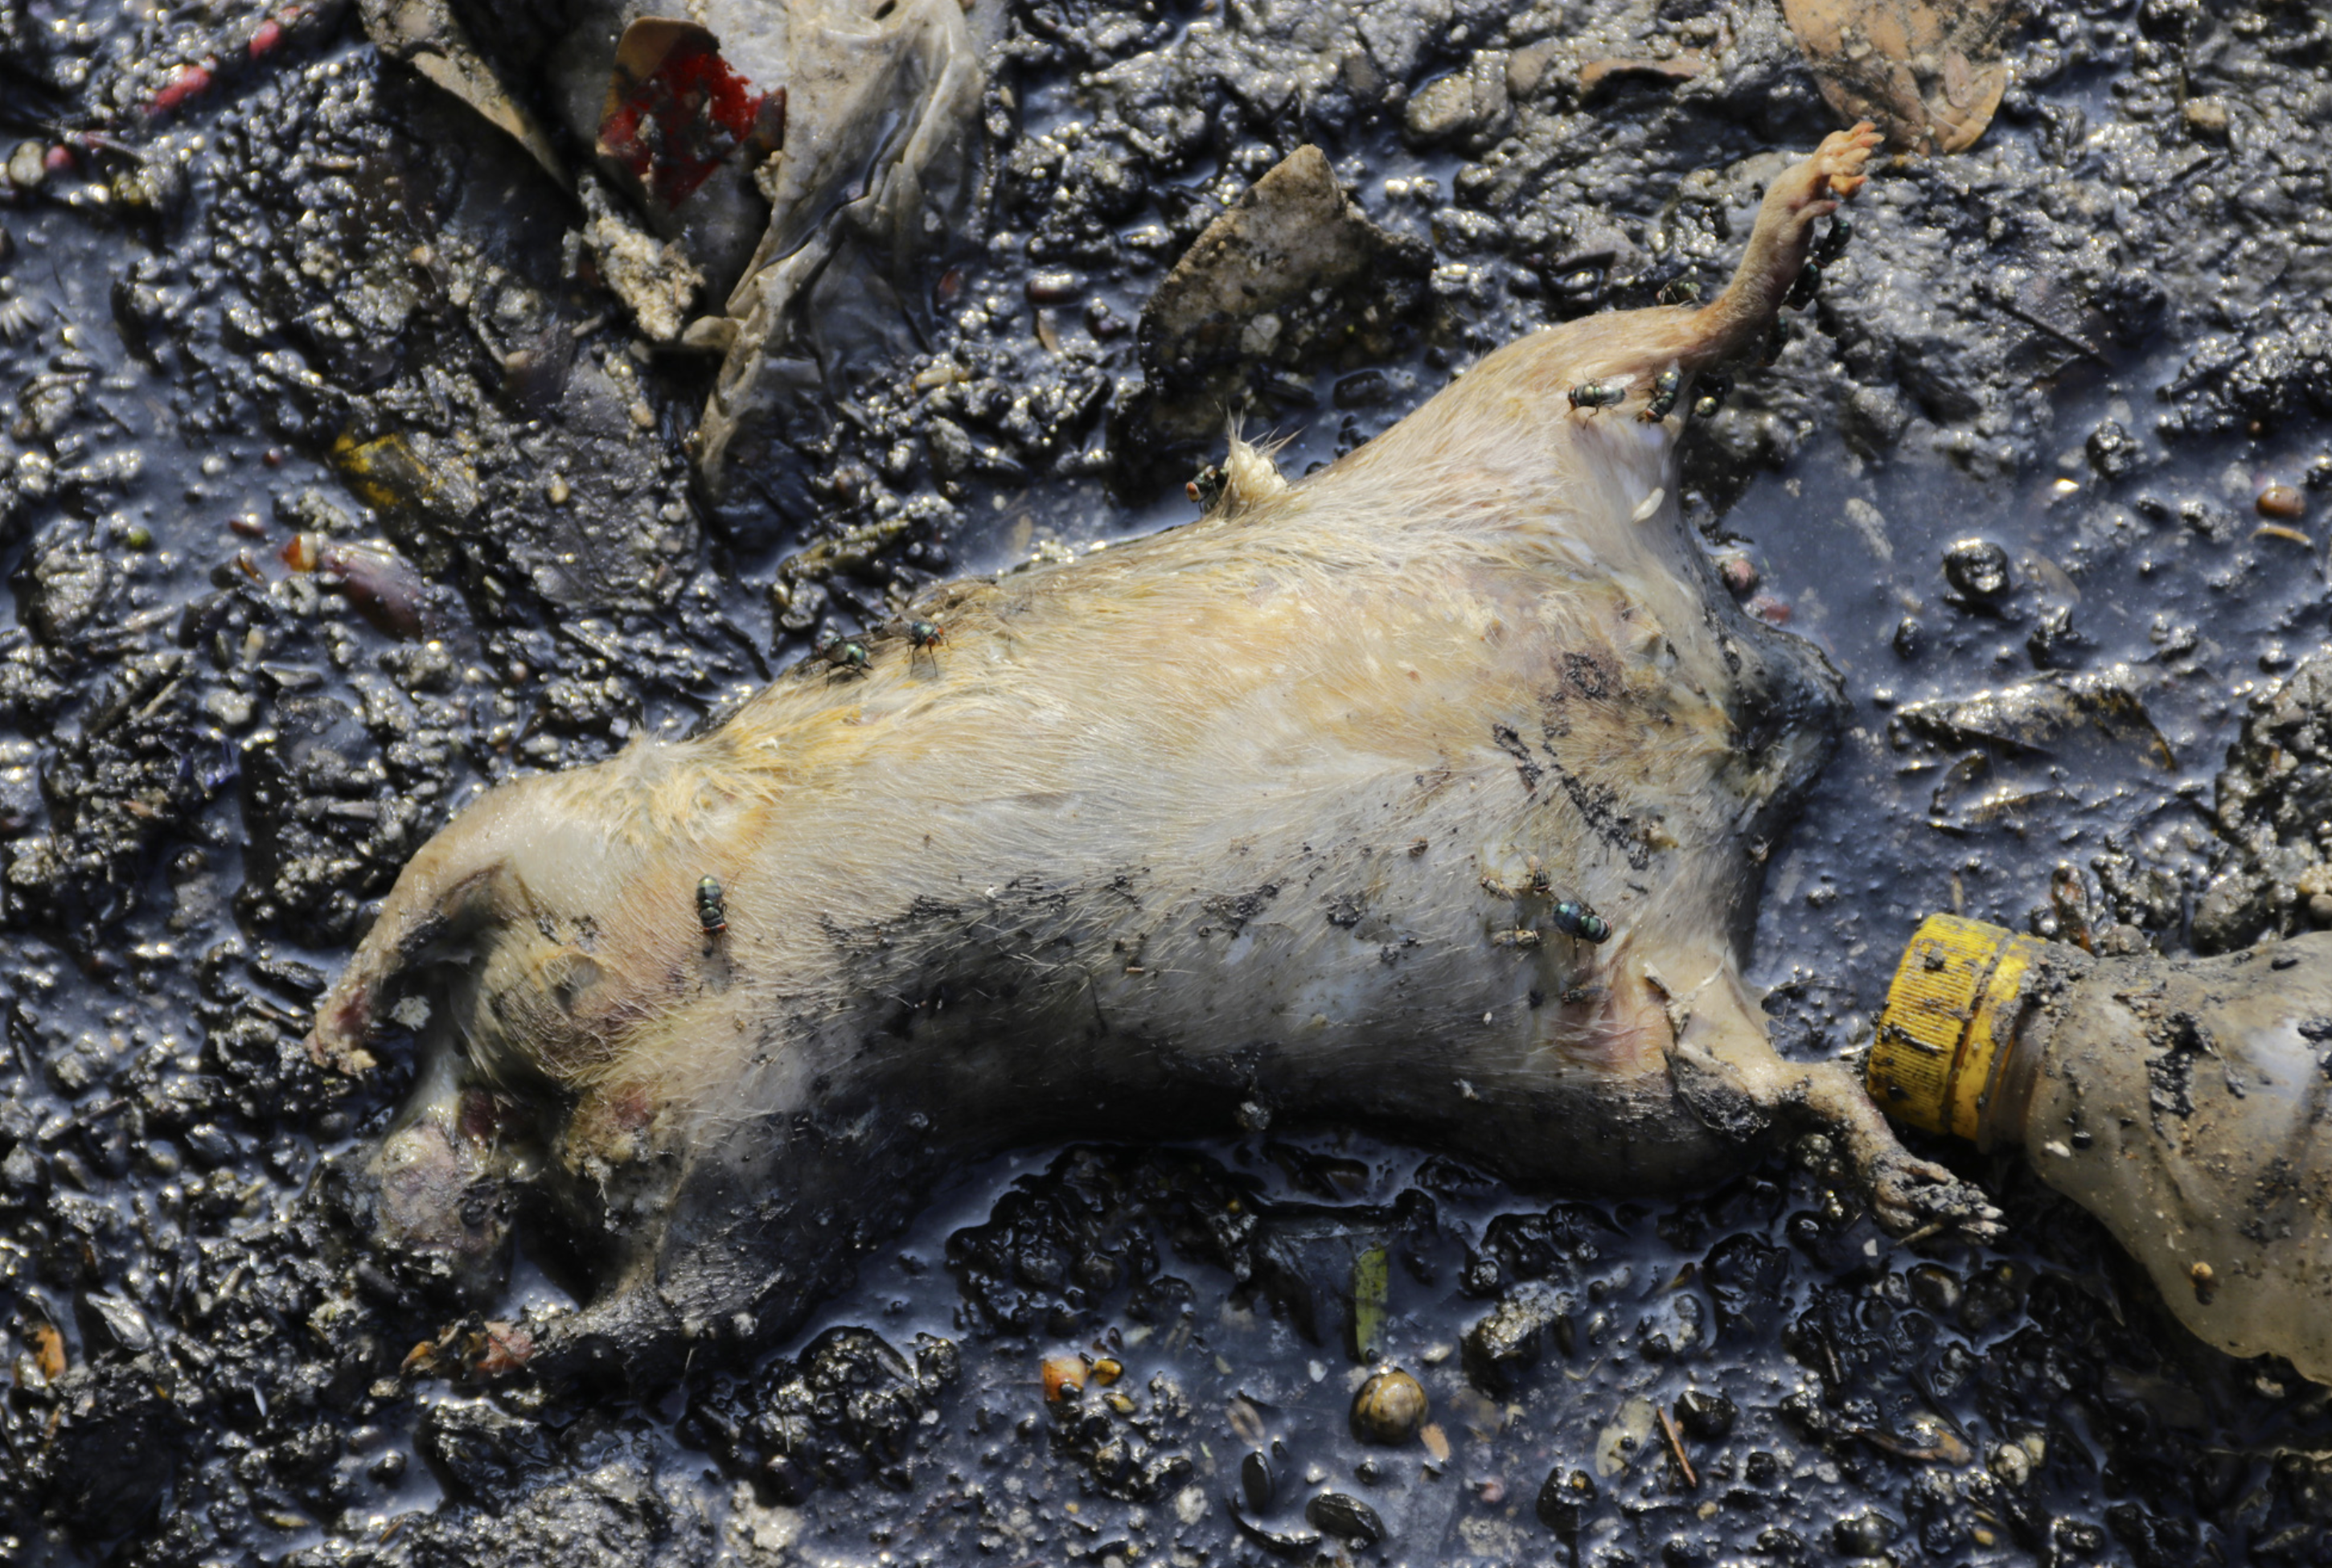 A section of Nuoc Den Canal in Binh Tan District under Ho Chi Minh City is polluted by waste and dead animal carcasses. Photo: Tien Quoc / Tuoi Tre